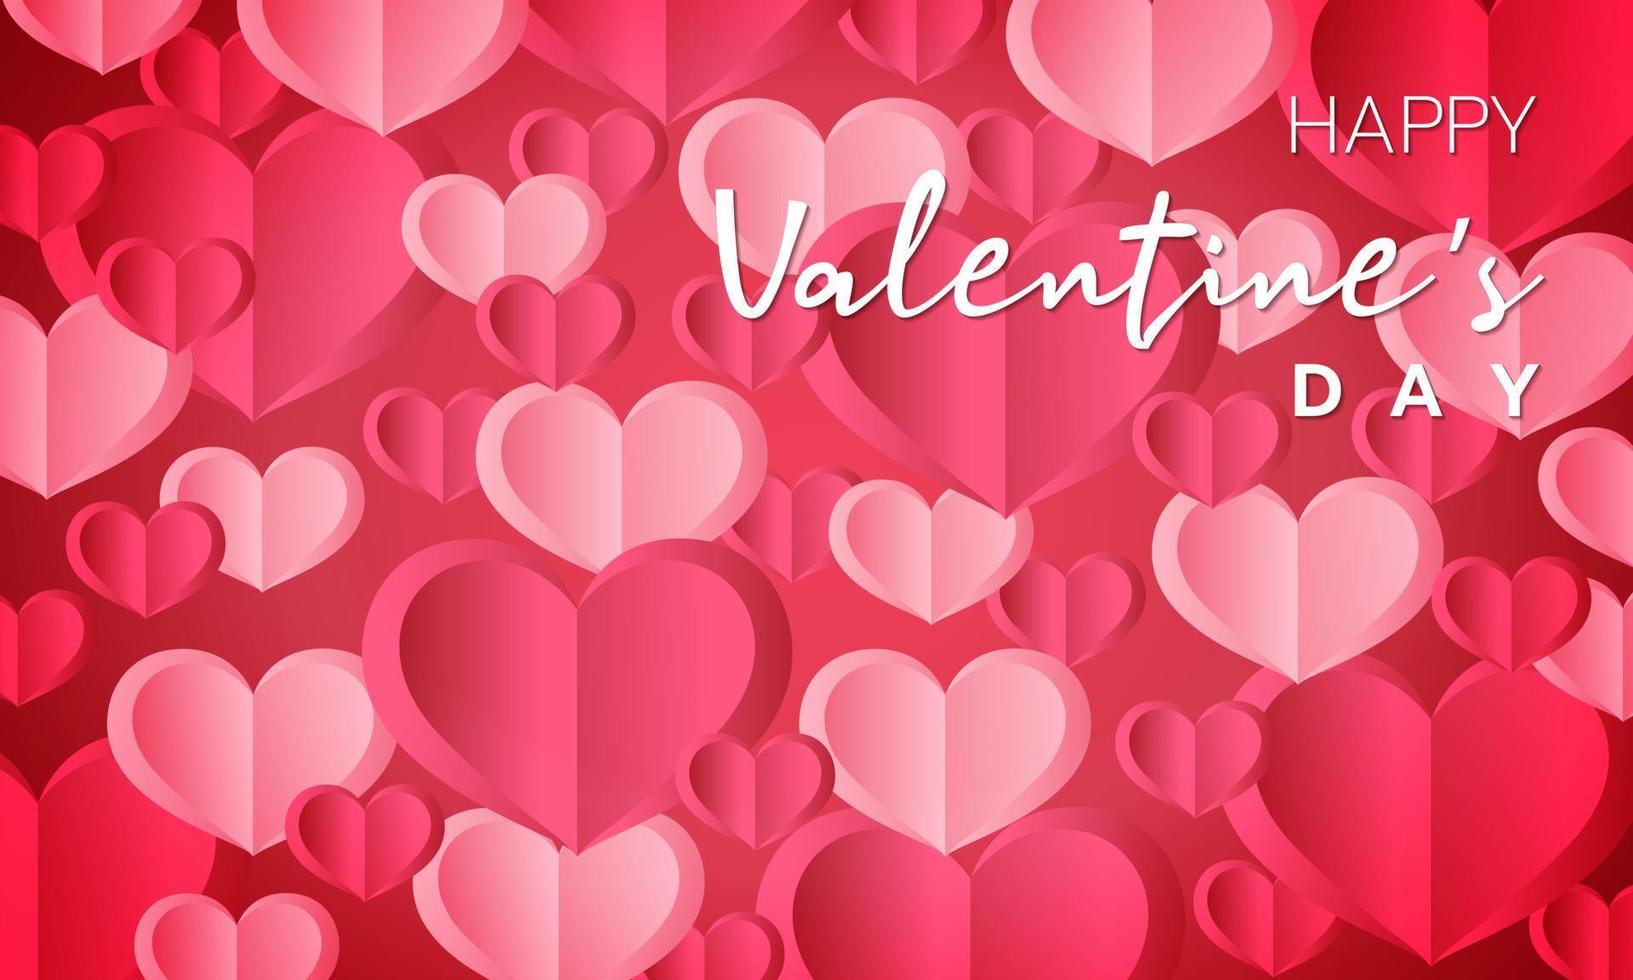 Happy Valentine's day dark pink and light pink paper hearts interspersed with reddish-pink backgrounds. vector